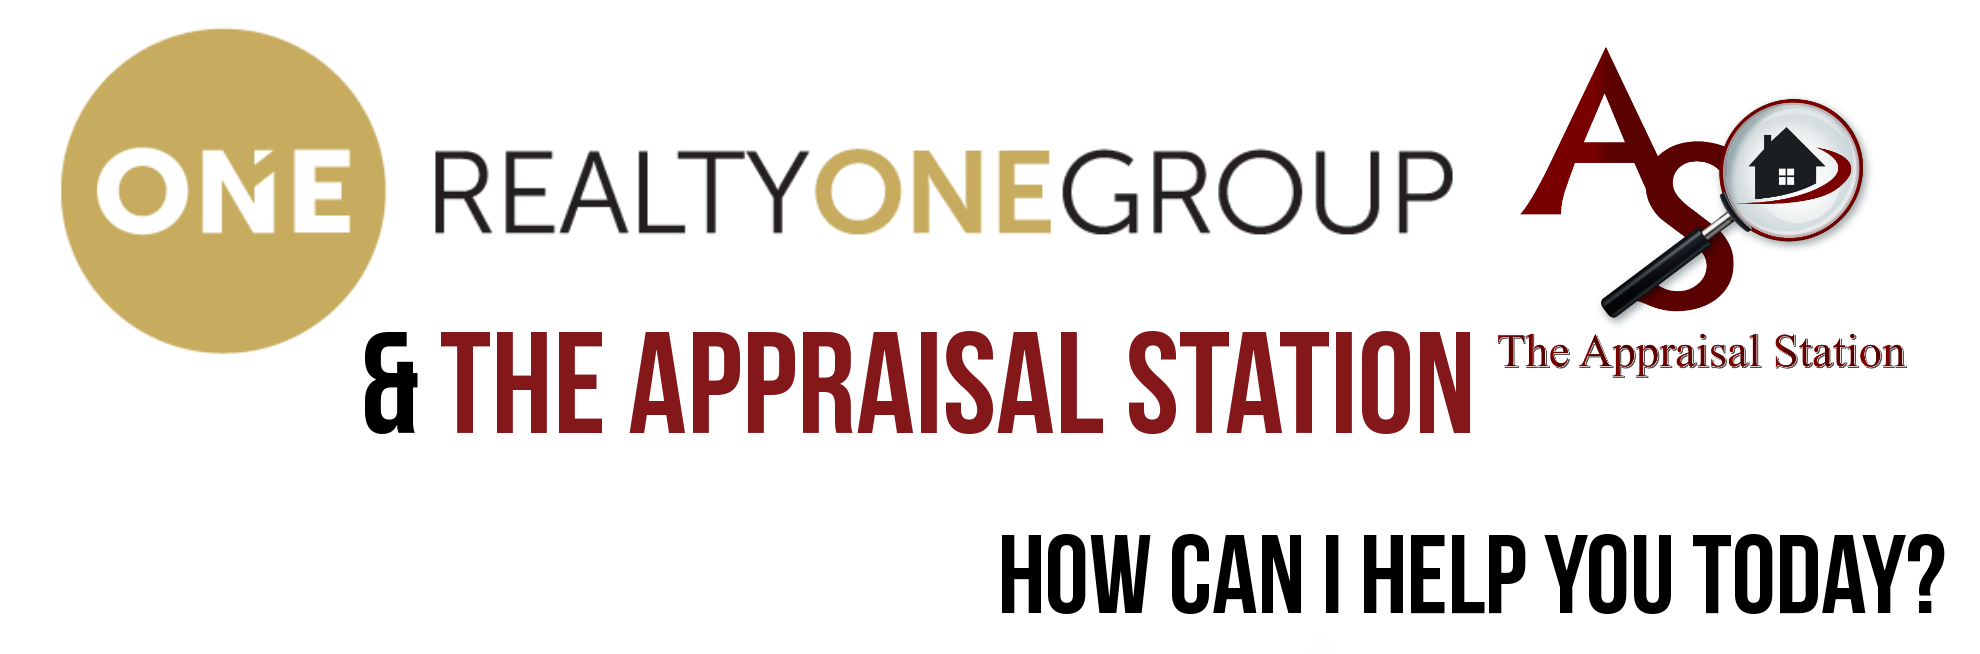 Realty ONE Group and The Appraisal Station